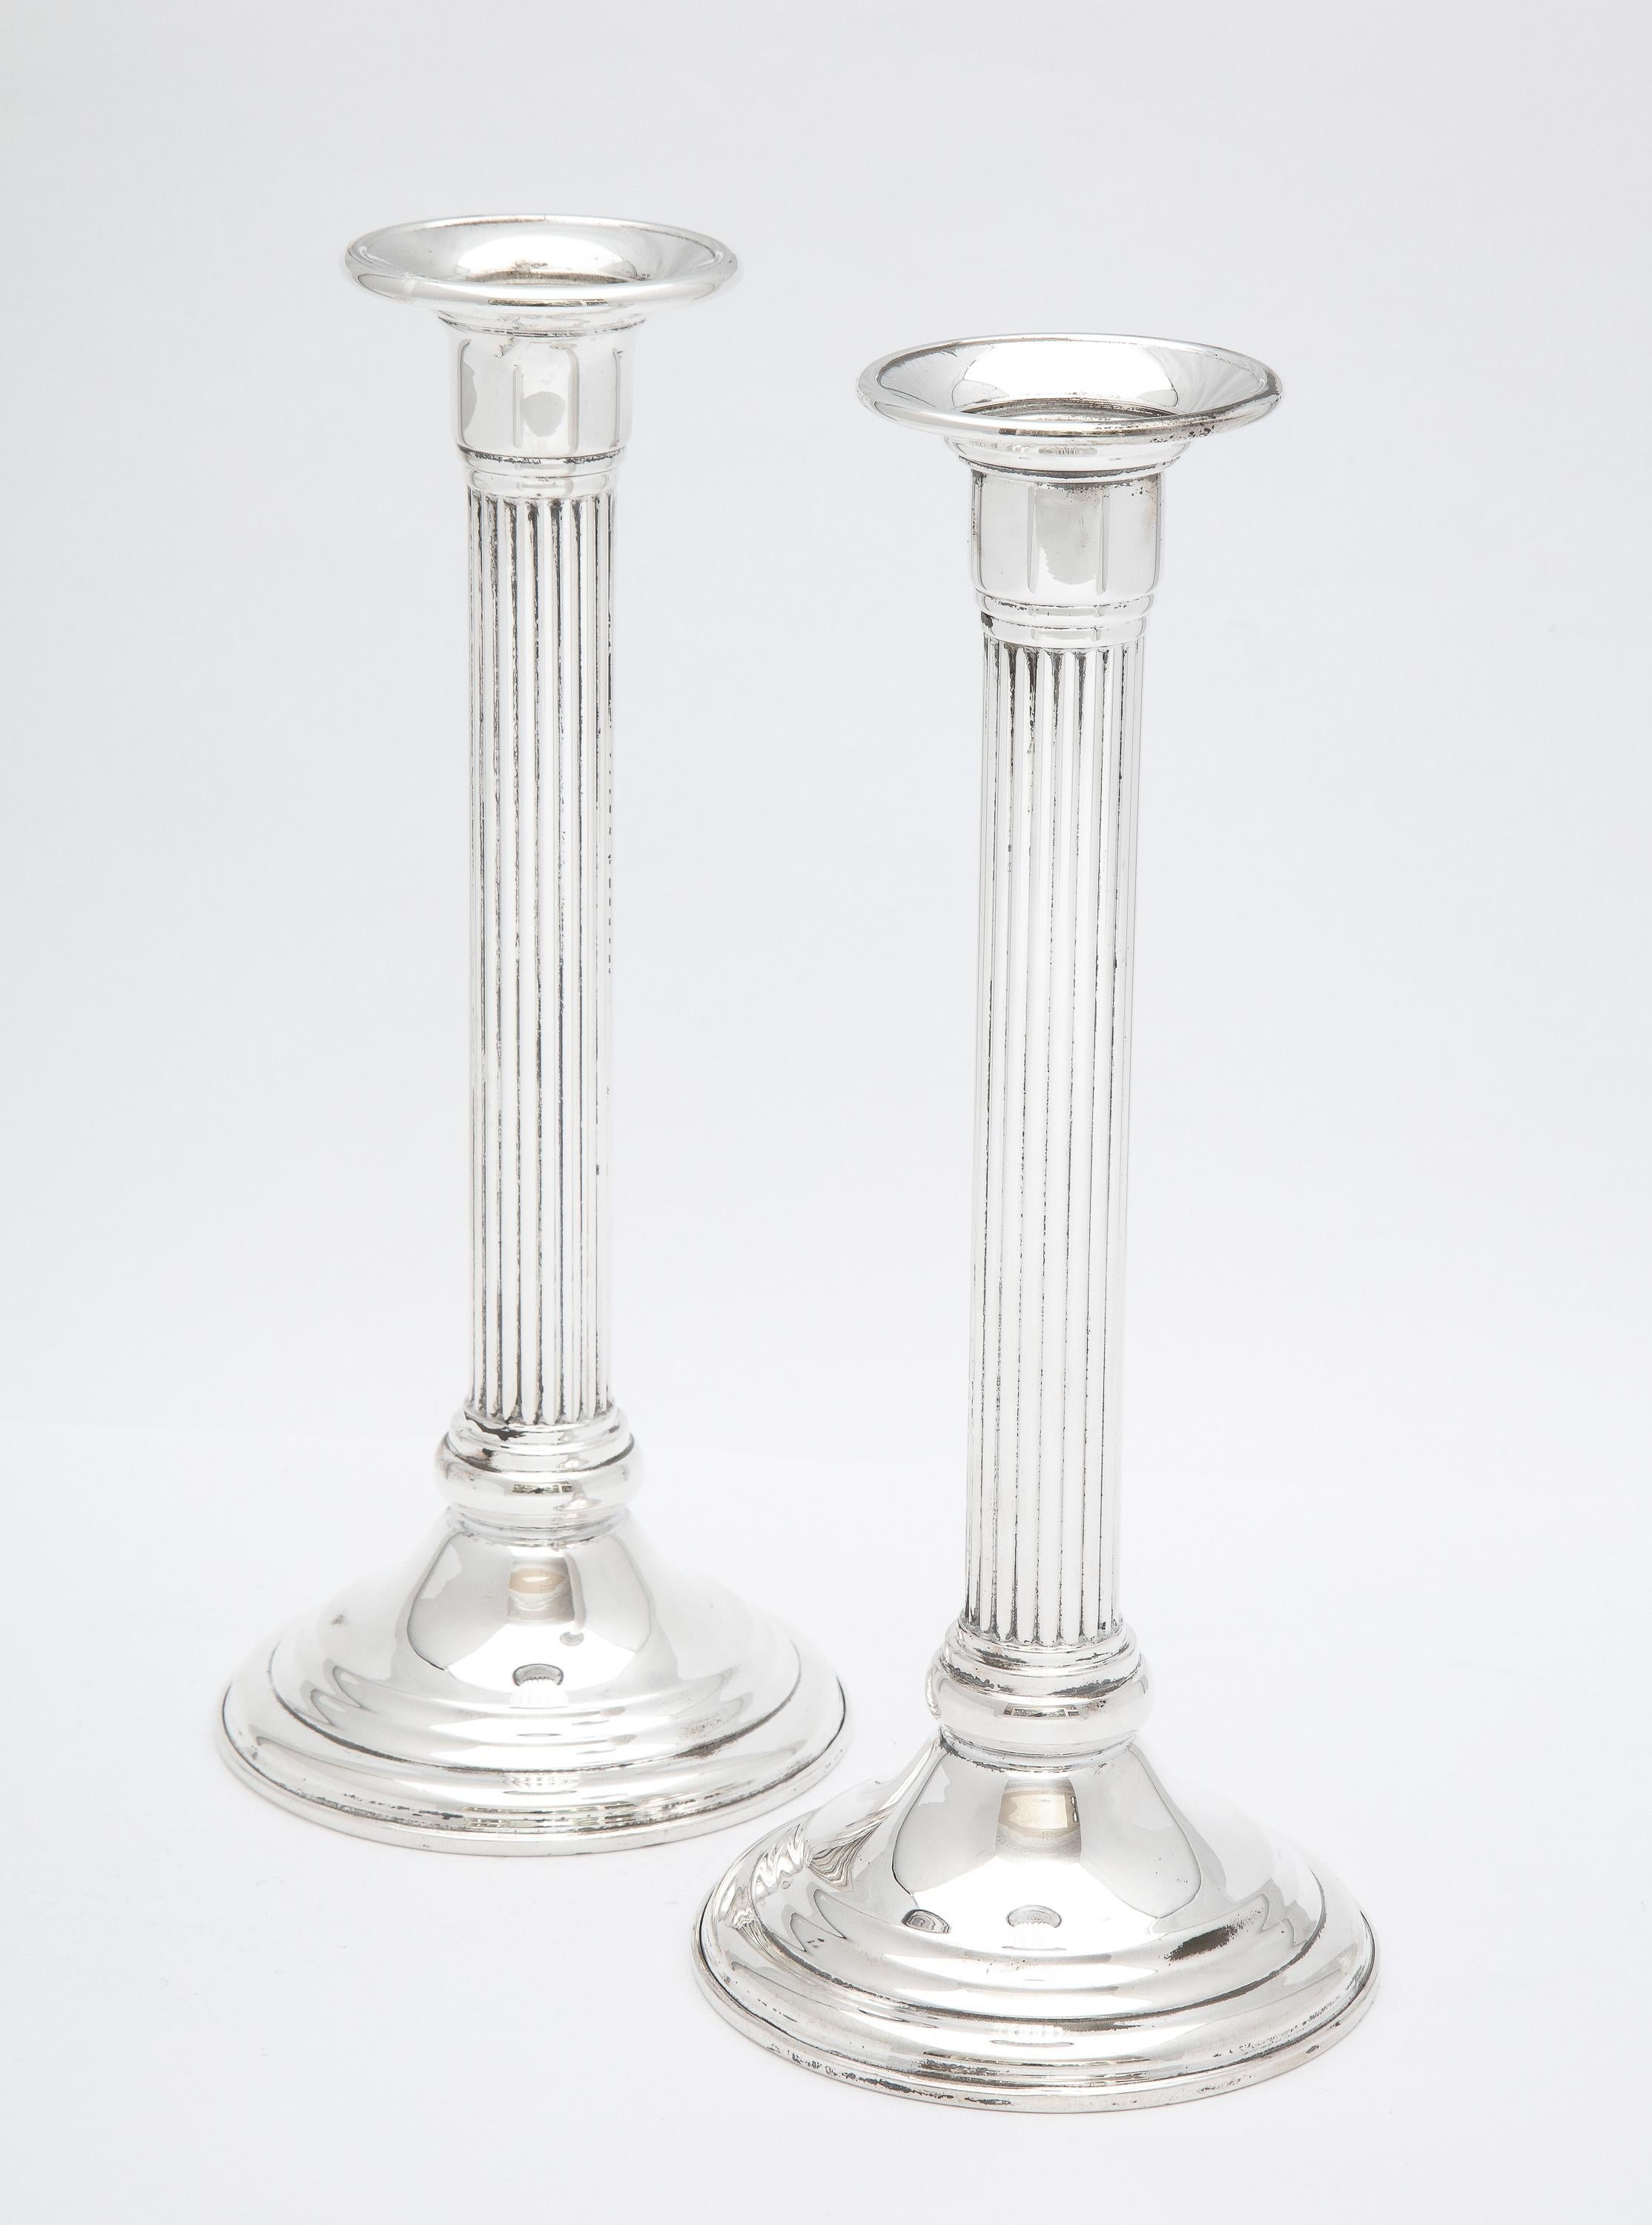 American Pair of Neoclassical-Style Column-Form Candlesticks